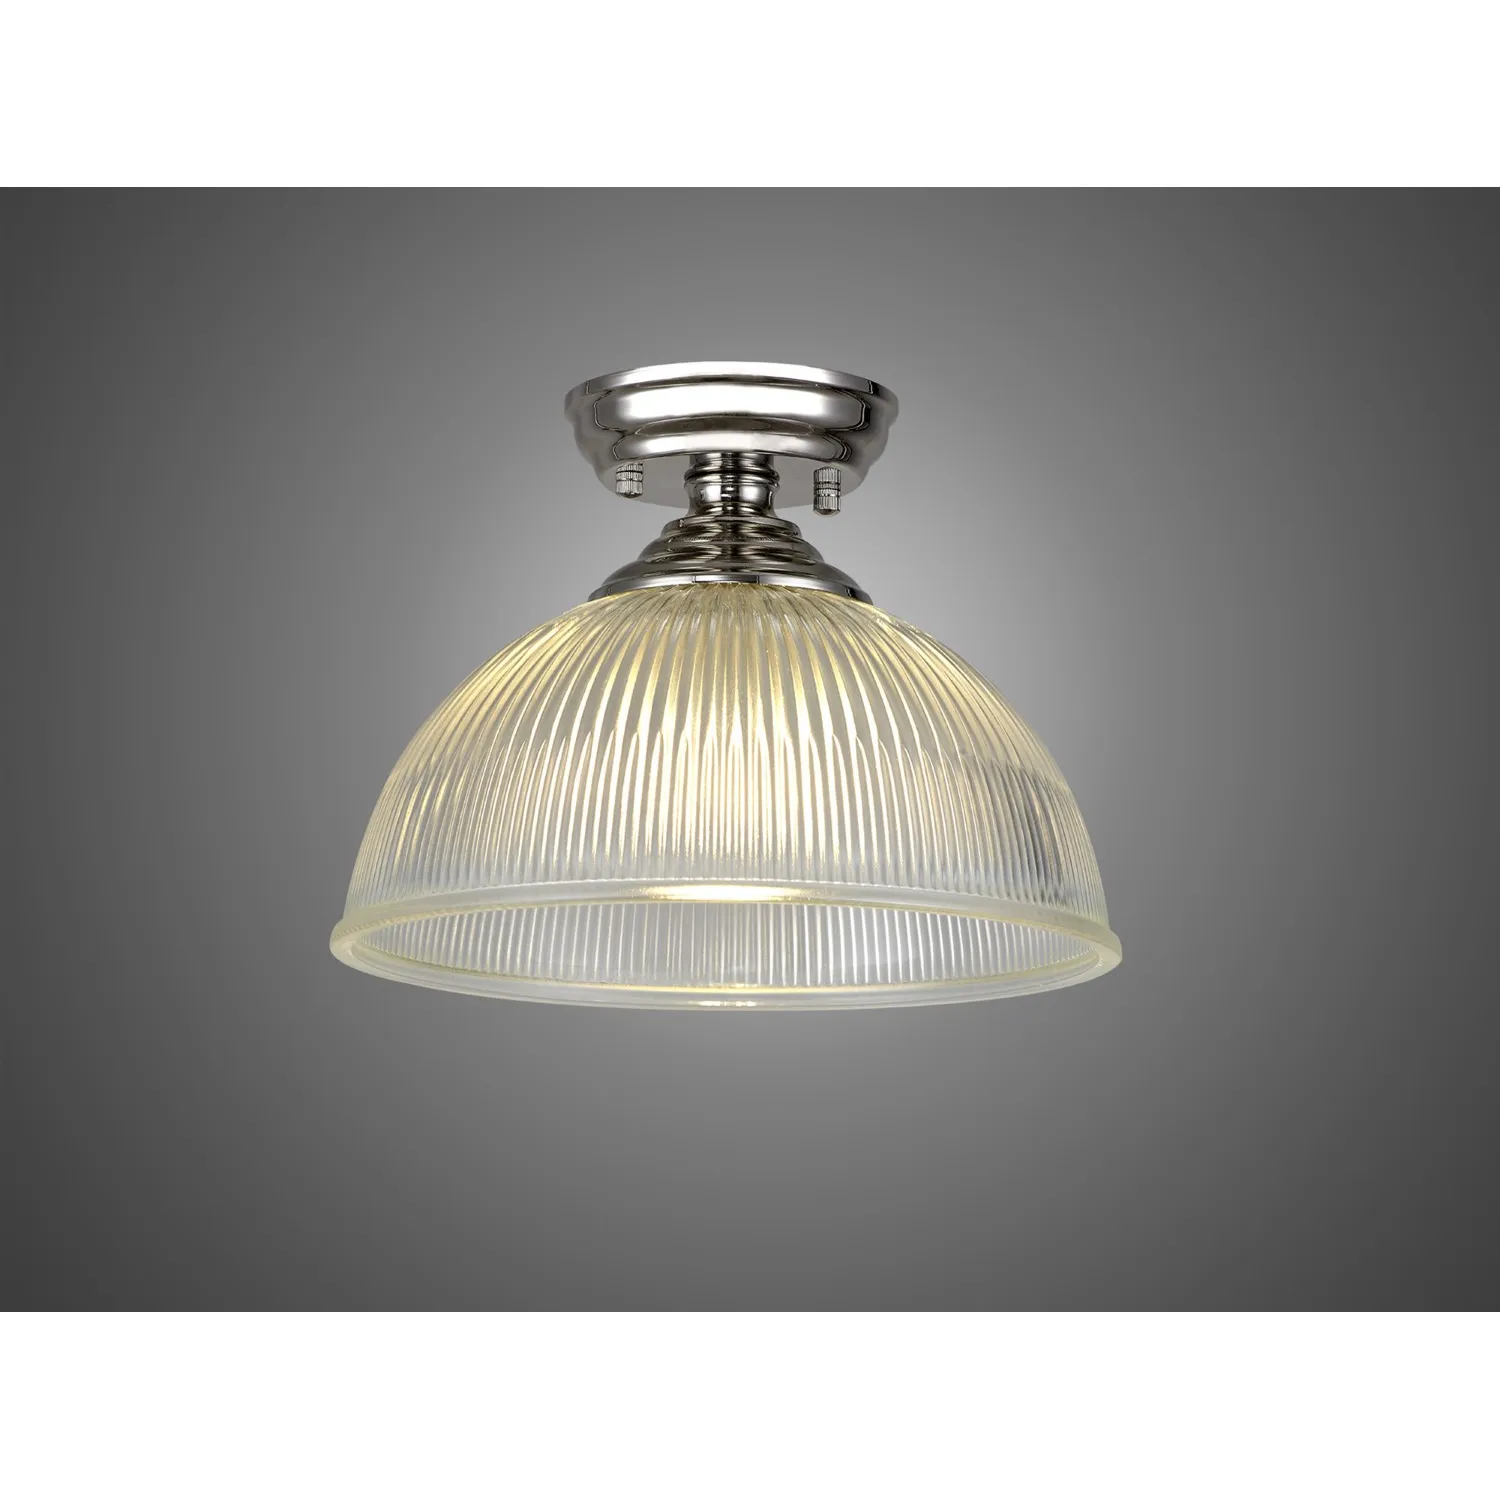 Billericay 1 Light Flush Ceiling E27 With Dome 30cm Glass Shade Polished Nickel Clear